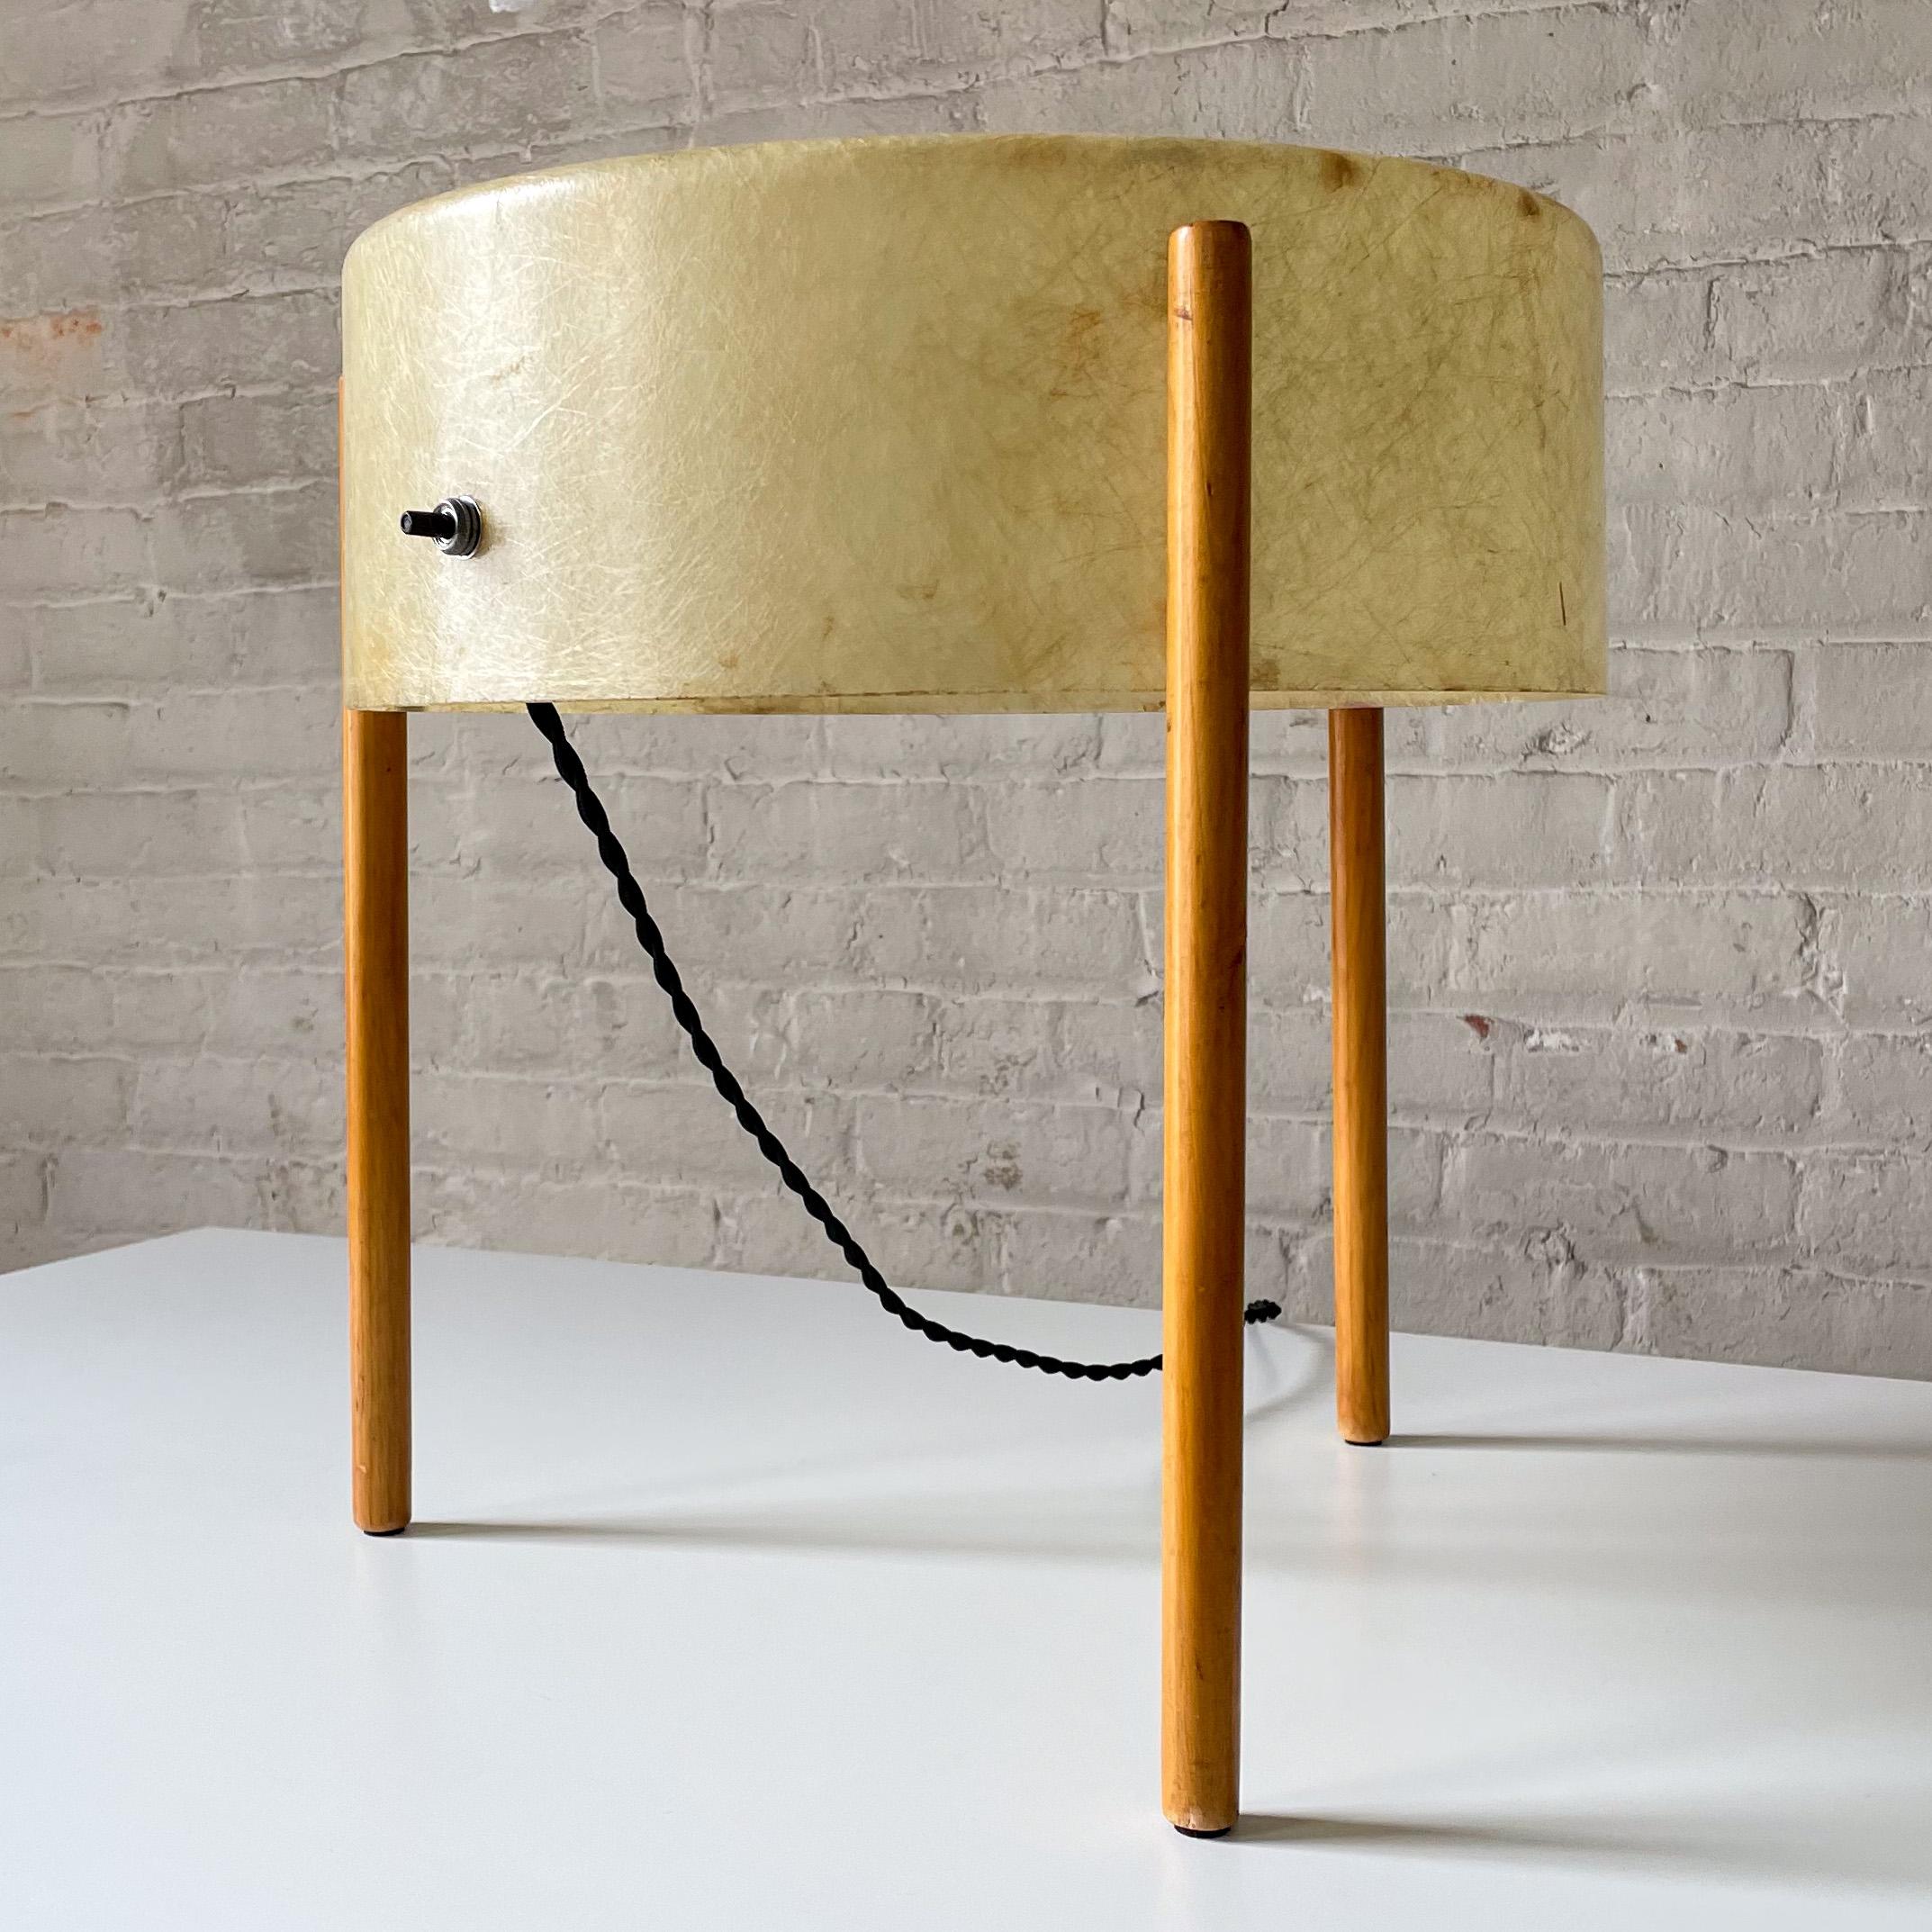 Drum-shaped lite table of molded iberglass mounted on three solid birch legs, designed and produced circa 1950 by Asian/American architectural lighting designer Bill Lam. William M.C. (Bill) Lam (1924-2012) was born and raised in Hawaii, entering